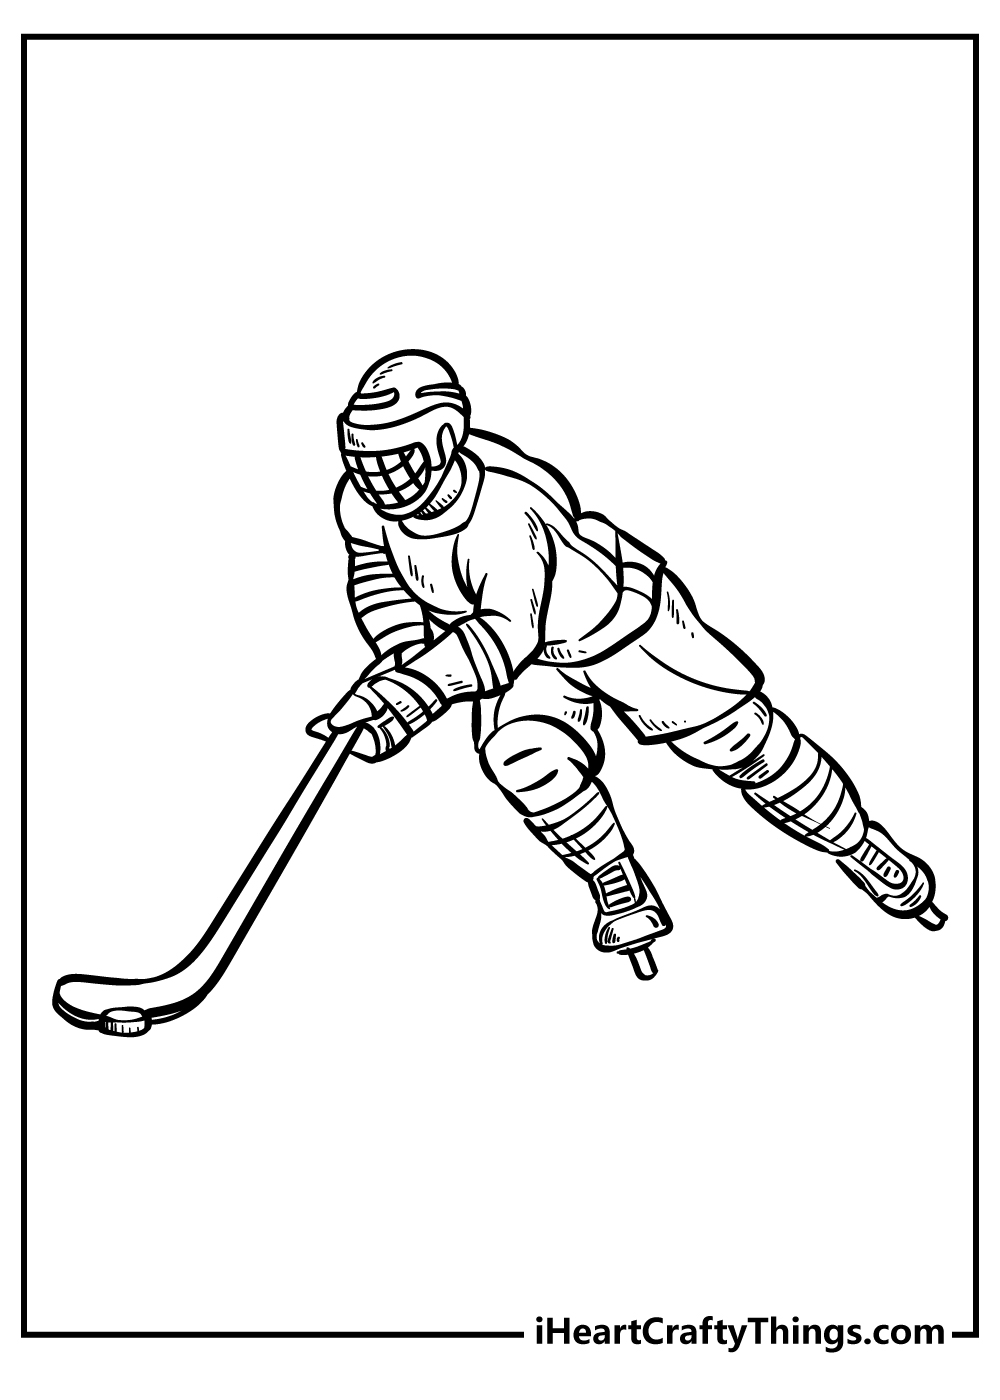 Hockey coloring pages free printables